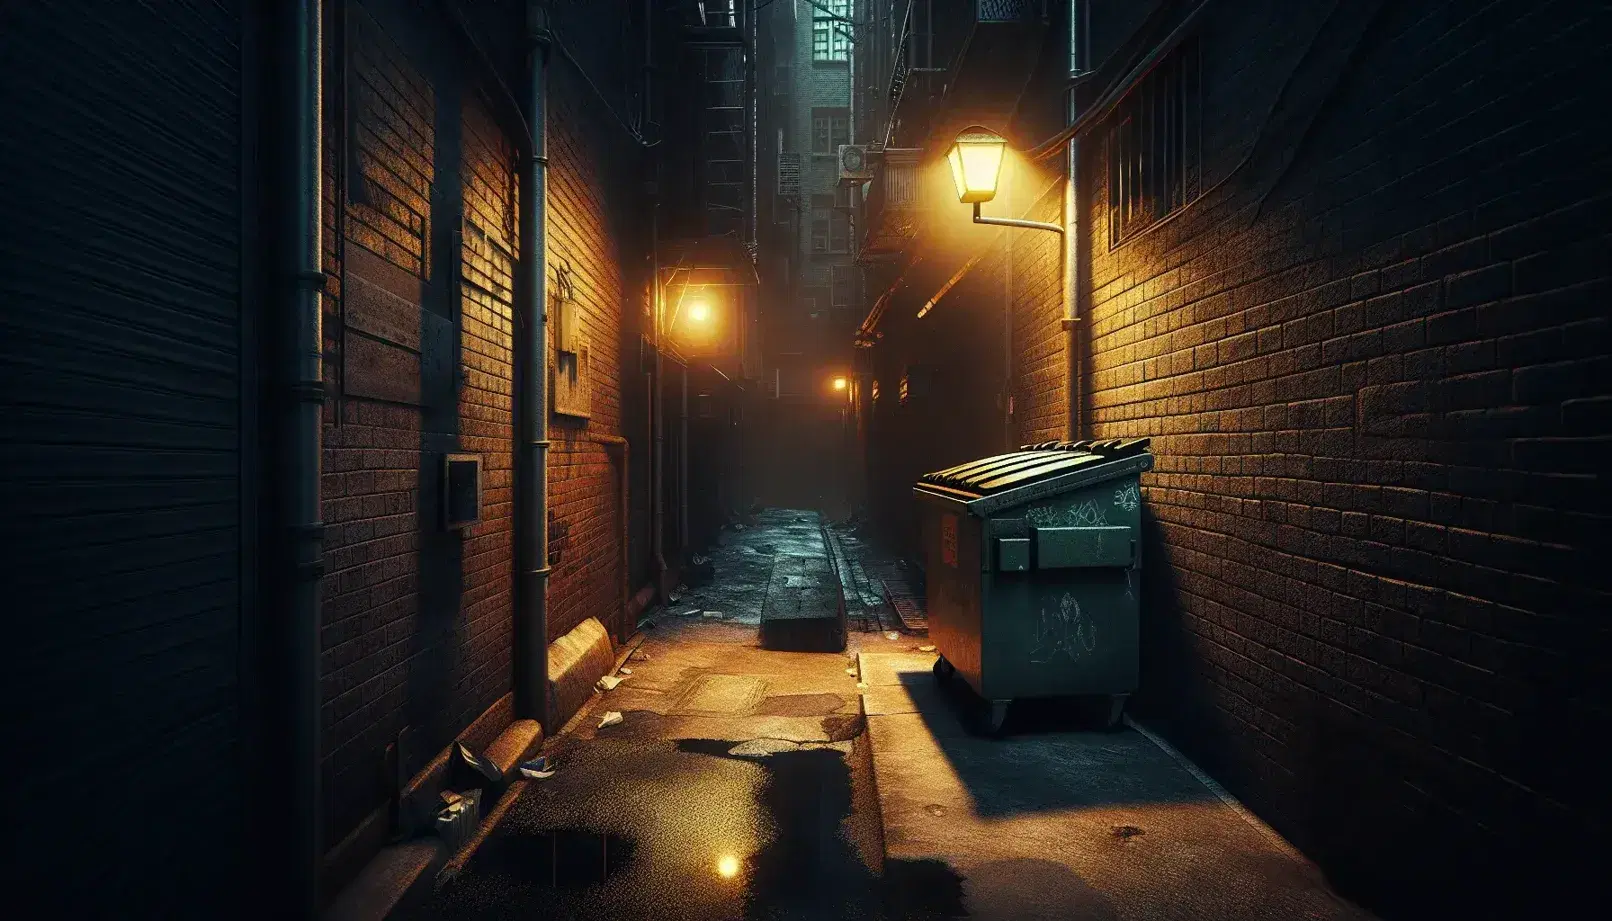 Urban alley illuminated by a street lamp with a sitting gray cat, green dumpster and puddles on concrete floor.